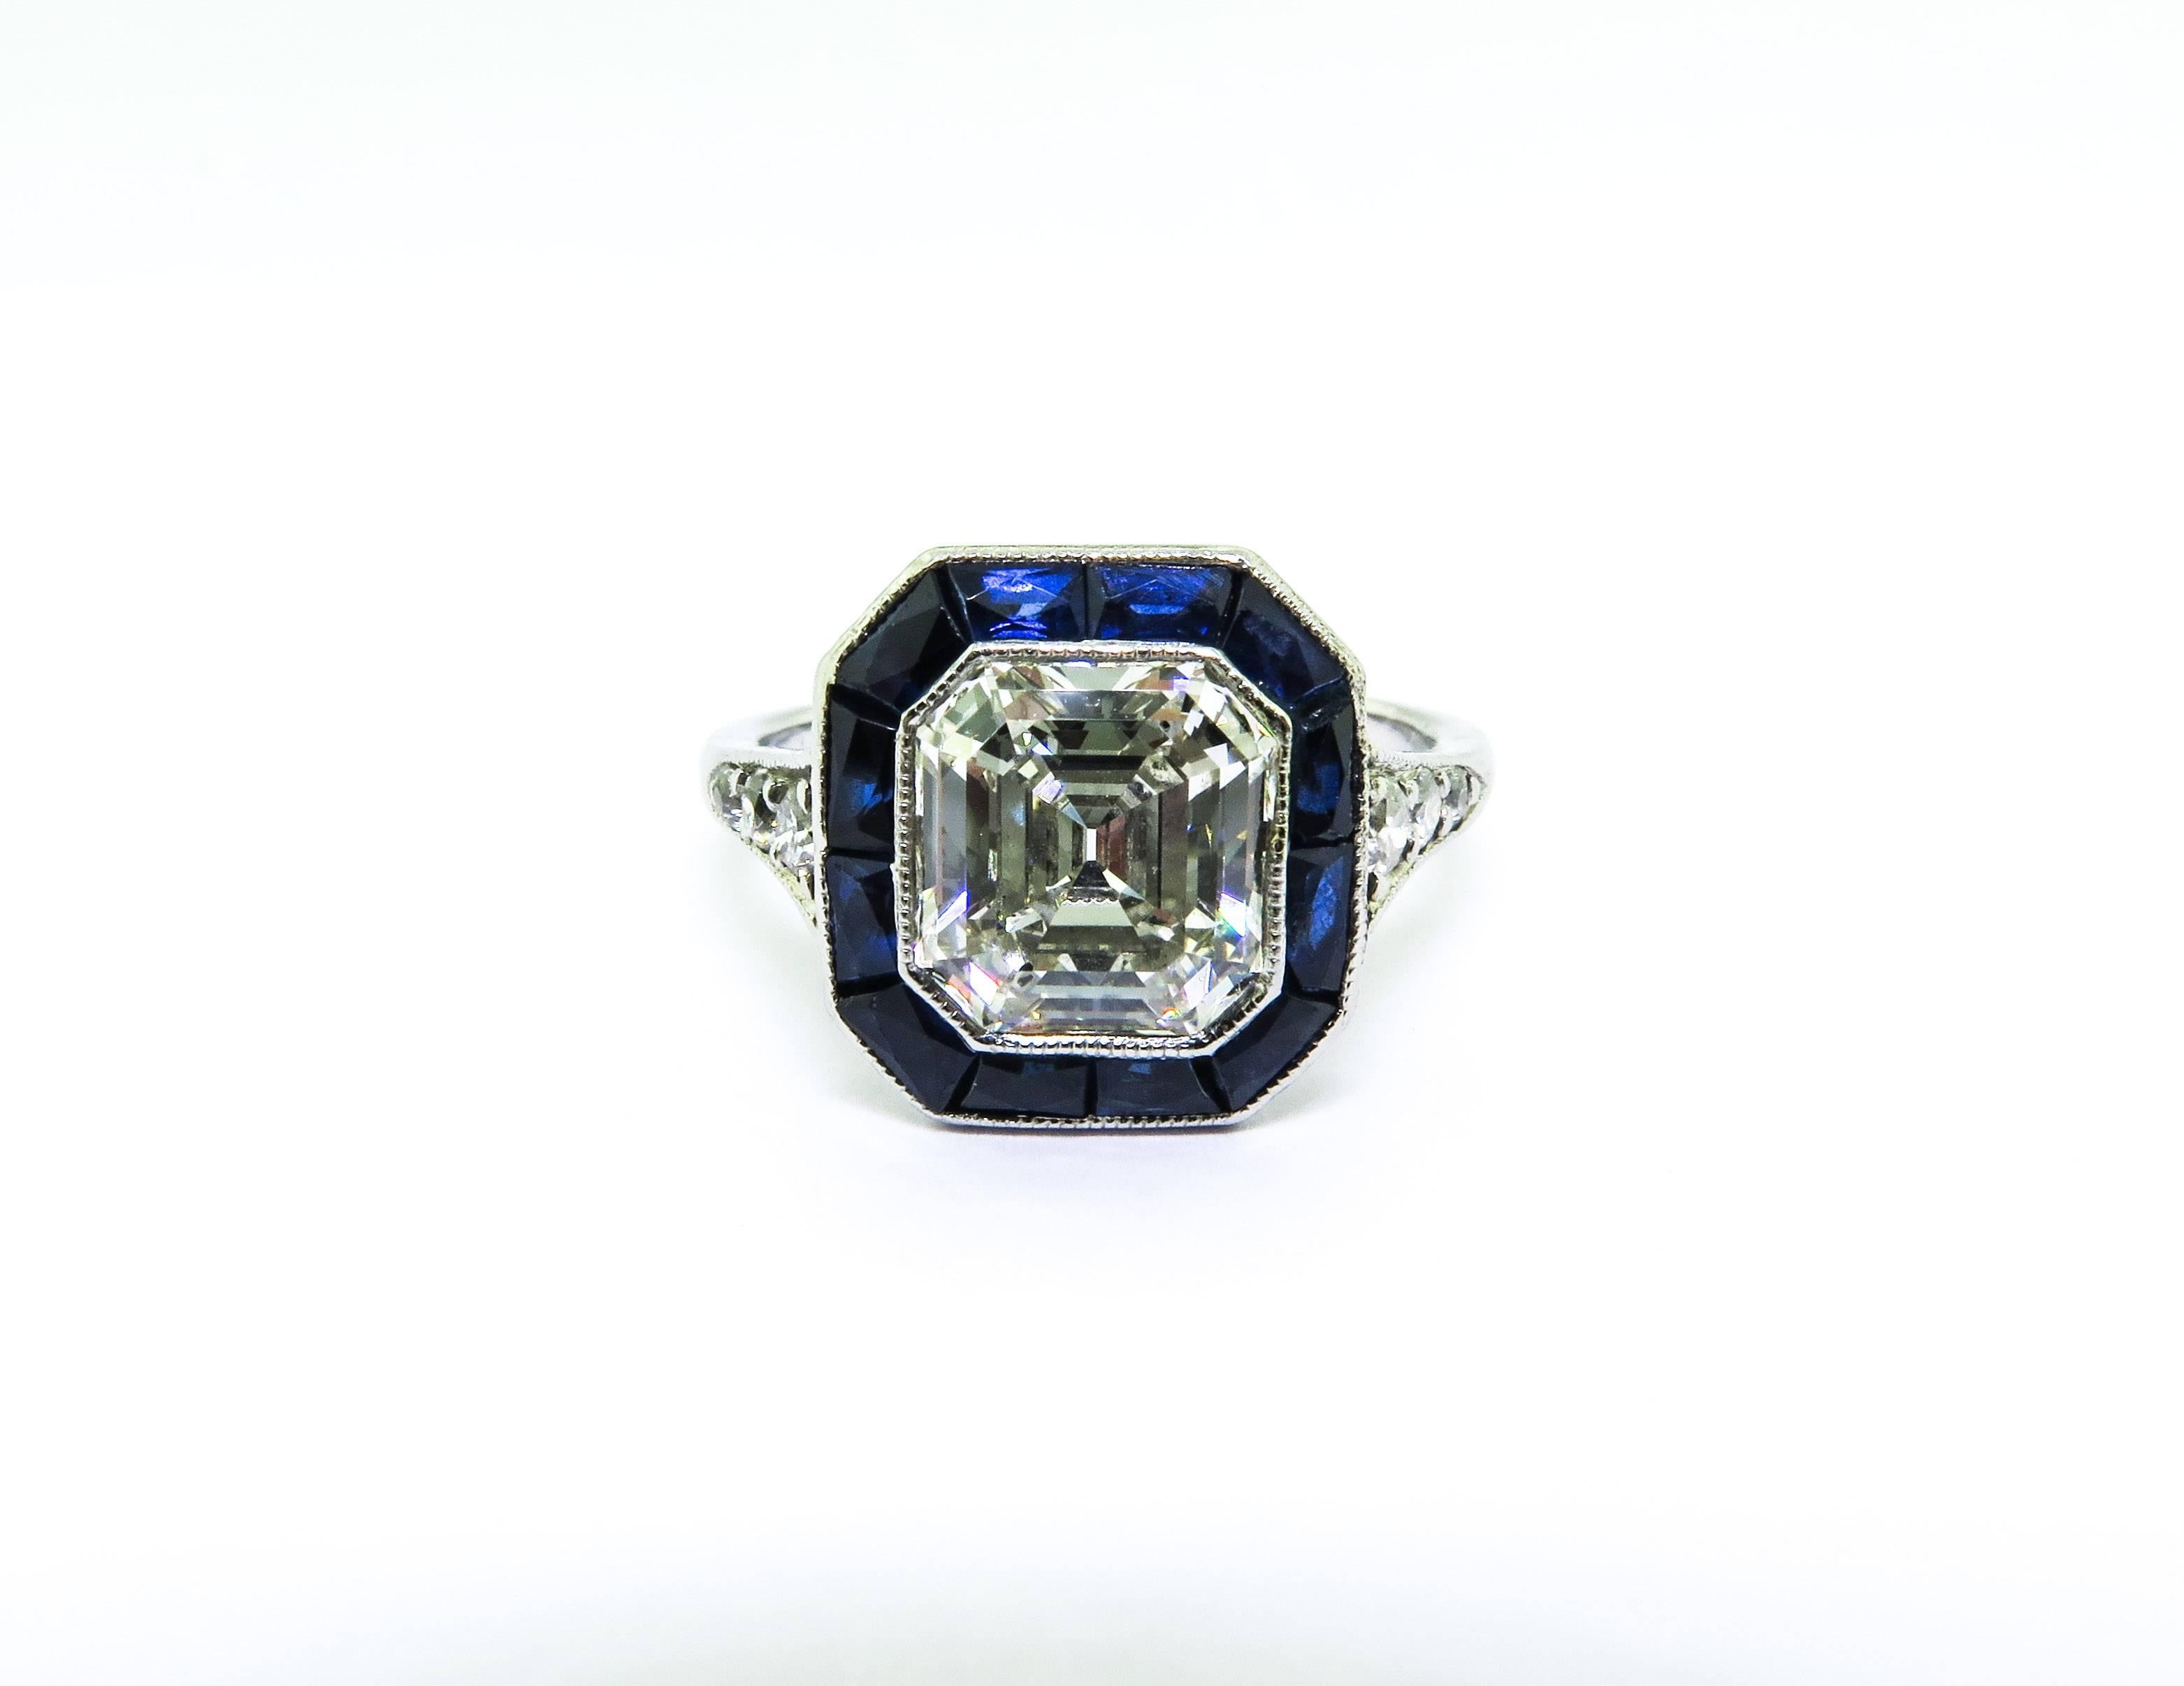 This modified emerald cut (asscher) diamond ring with baguette cut sapphire halo bezel set with beaded edge. With diamond details, and craftsmanship from around the 1920's. The 2.20 ct. center diamond is H color and SI1 clarity. This would make the